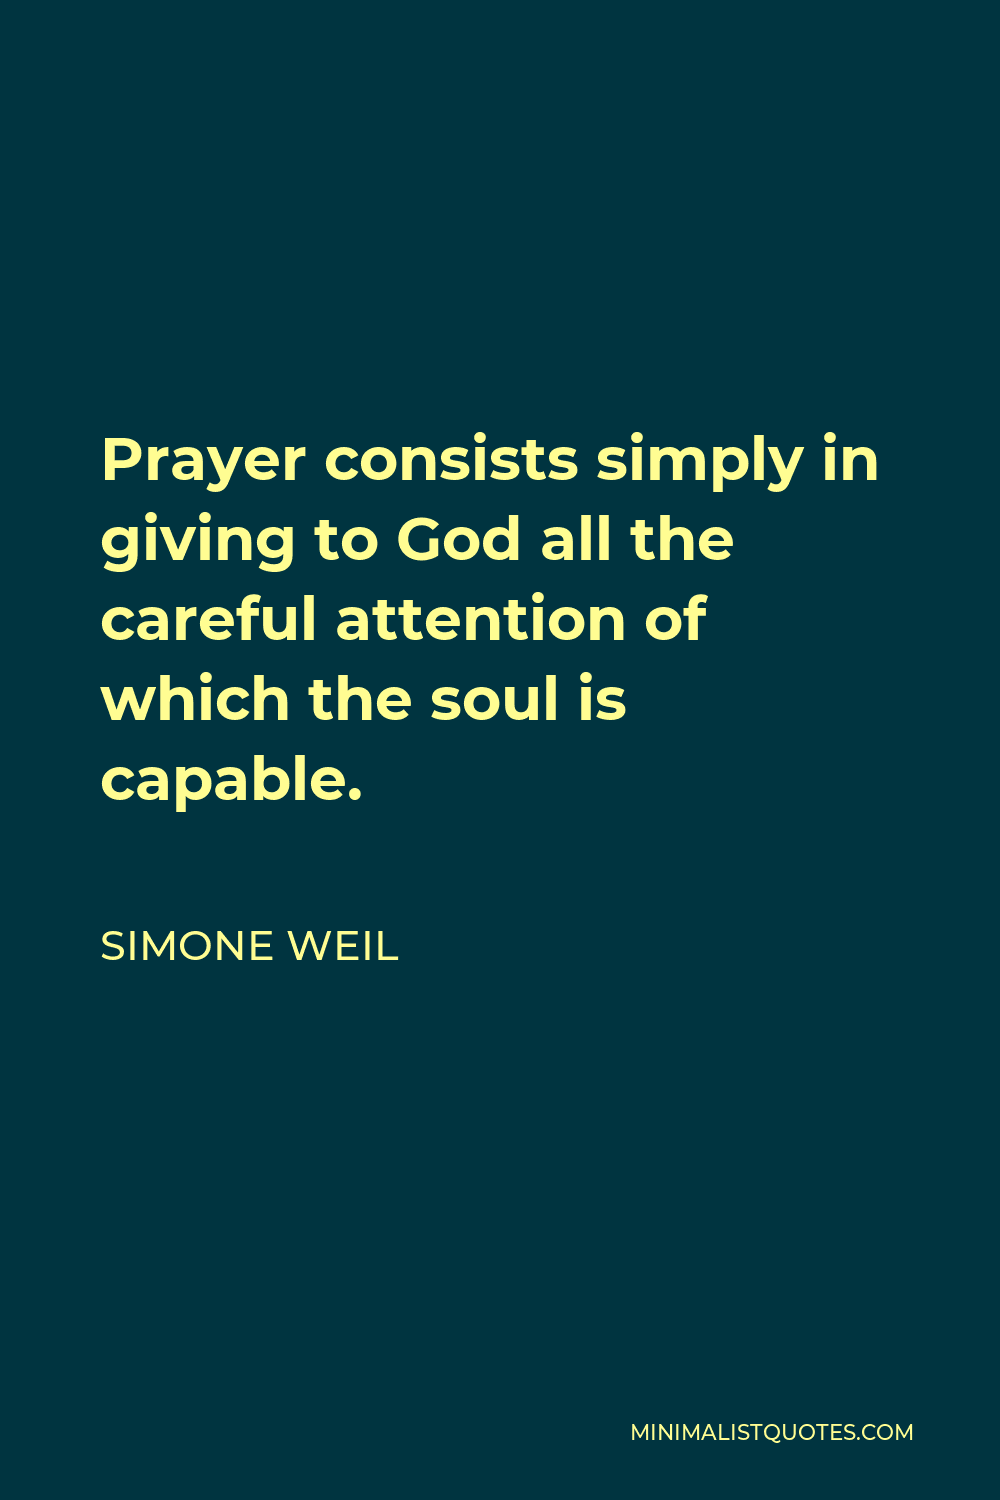 Simone Weil Quote - Prayer consists simply in giving to God all the careful attention of which the soul is capable.